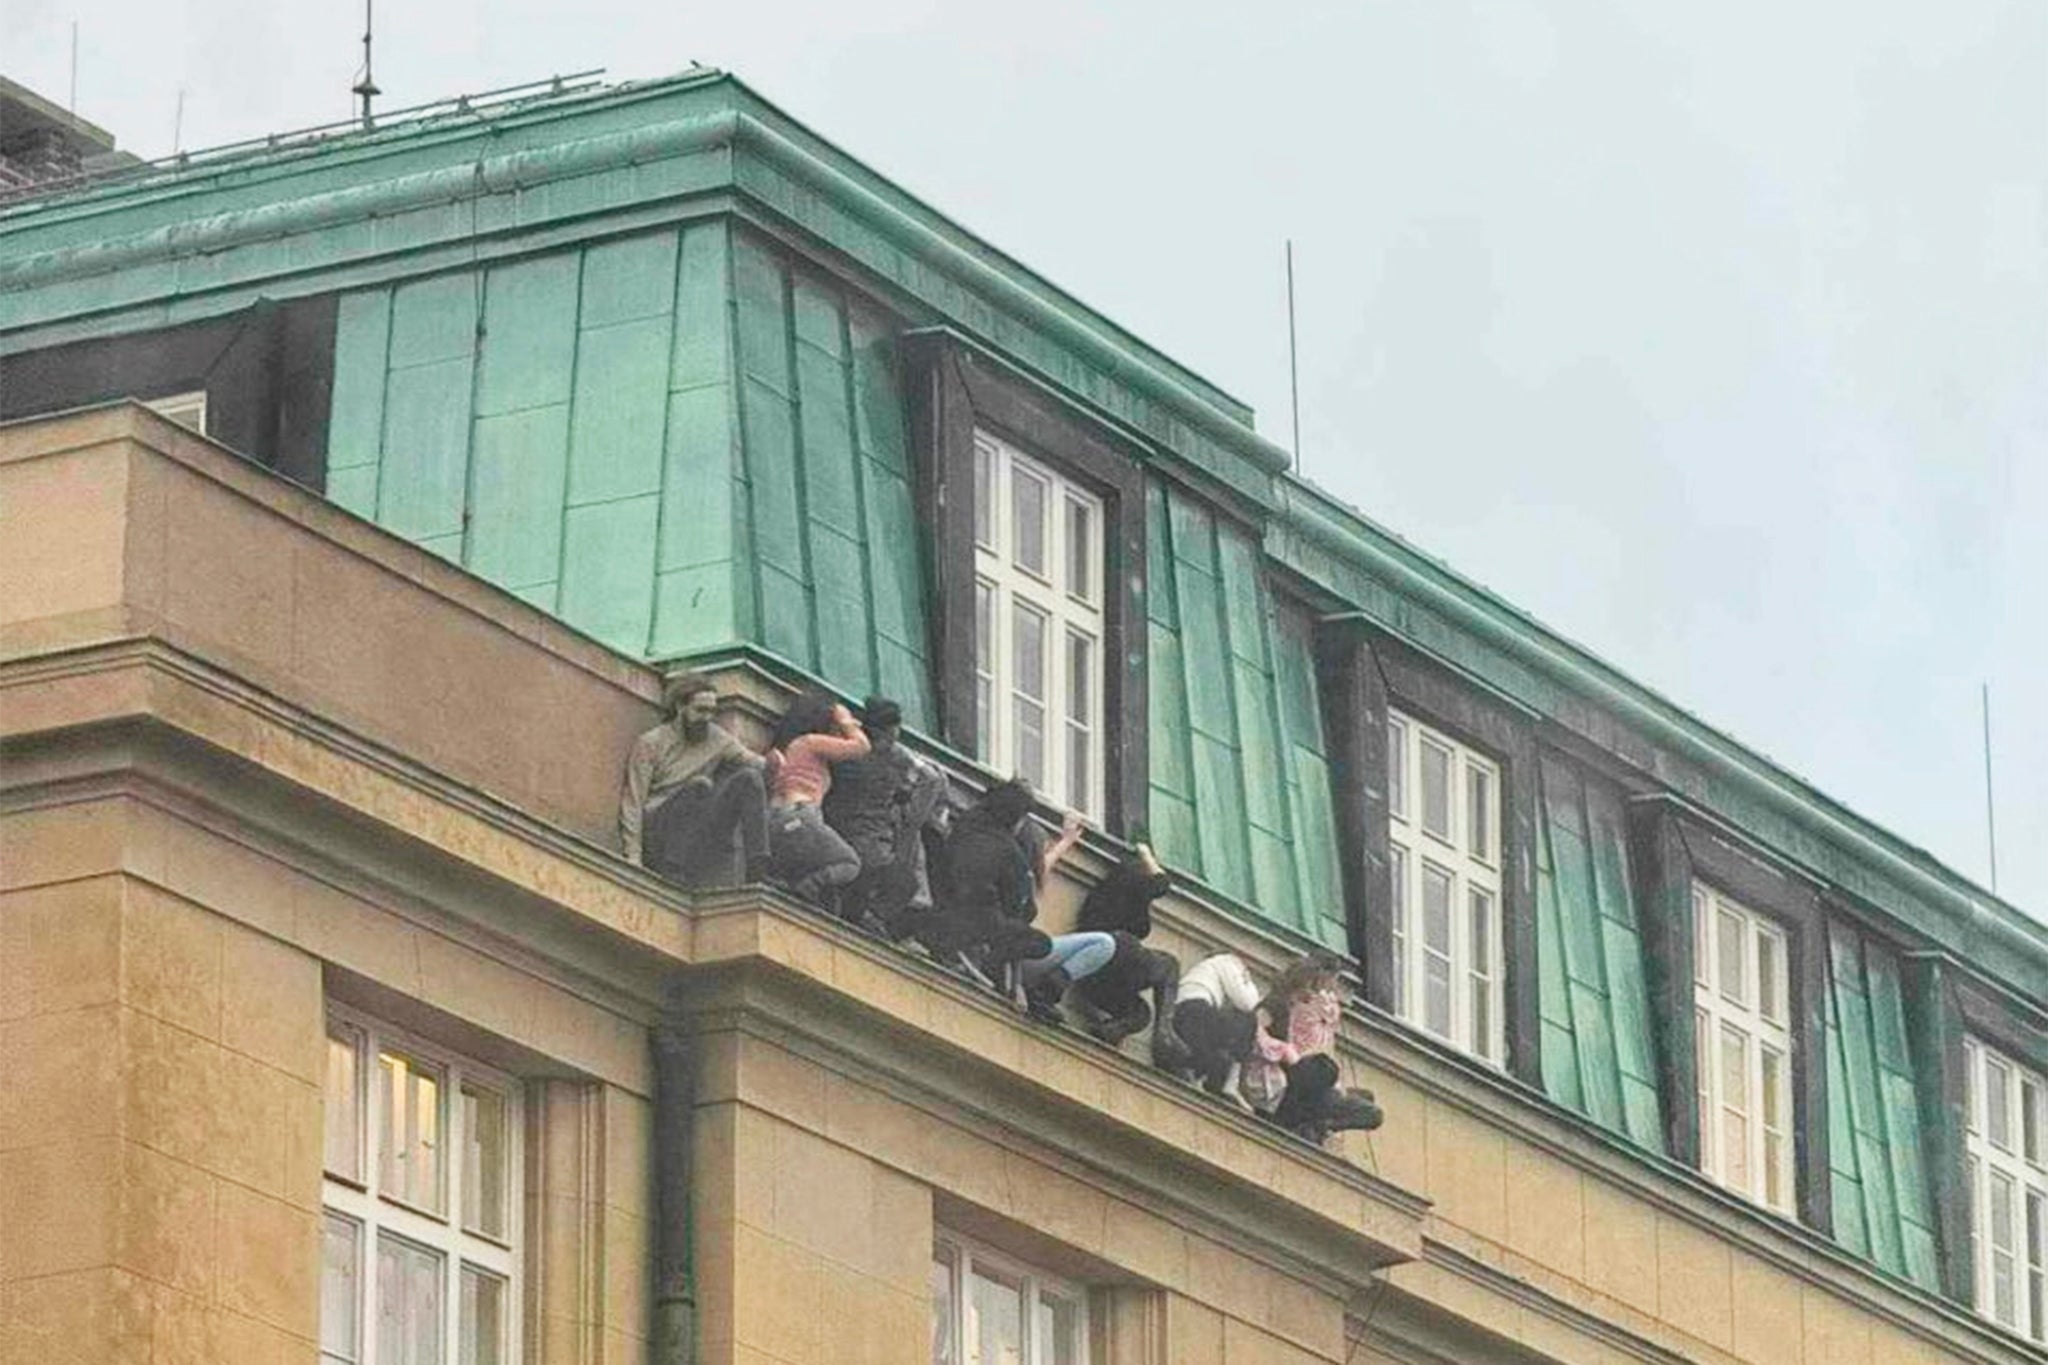 Eight students seen hiding on a building ledge to escape the gunman